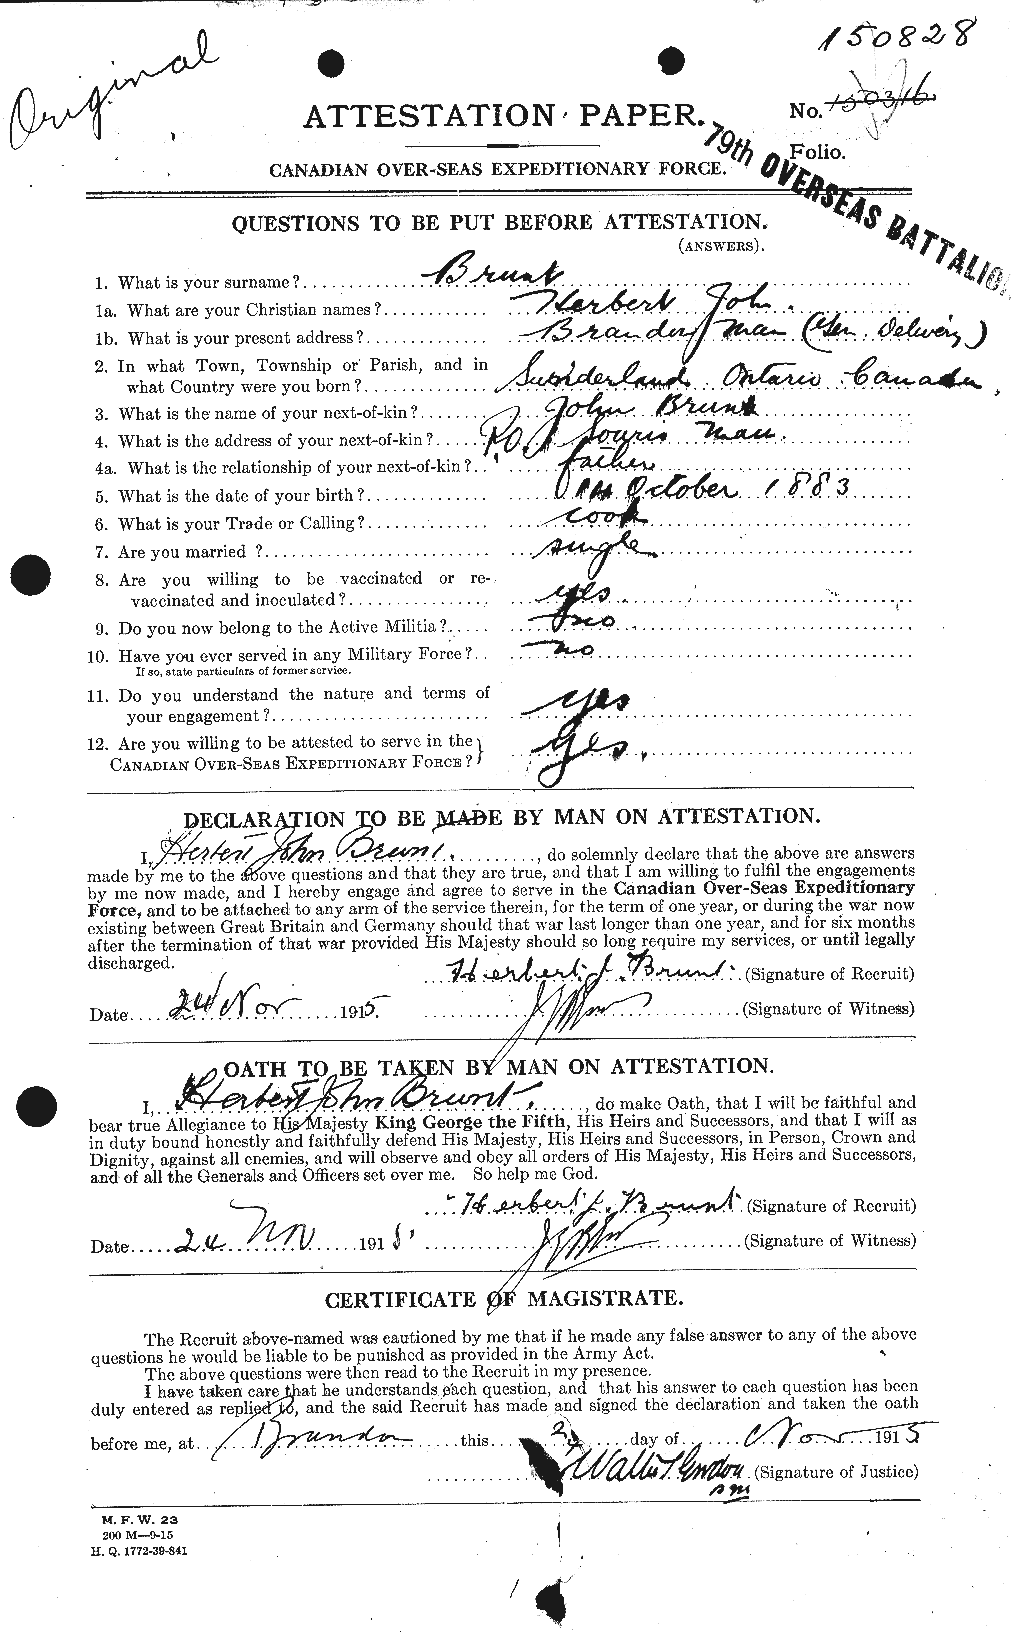 Personnel Records of the First World War - CEF 268606a